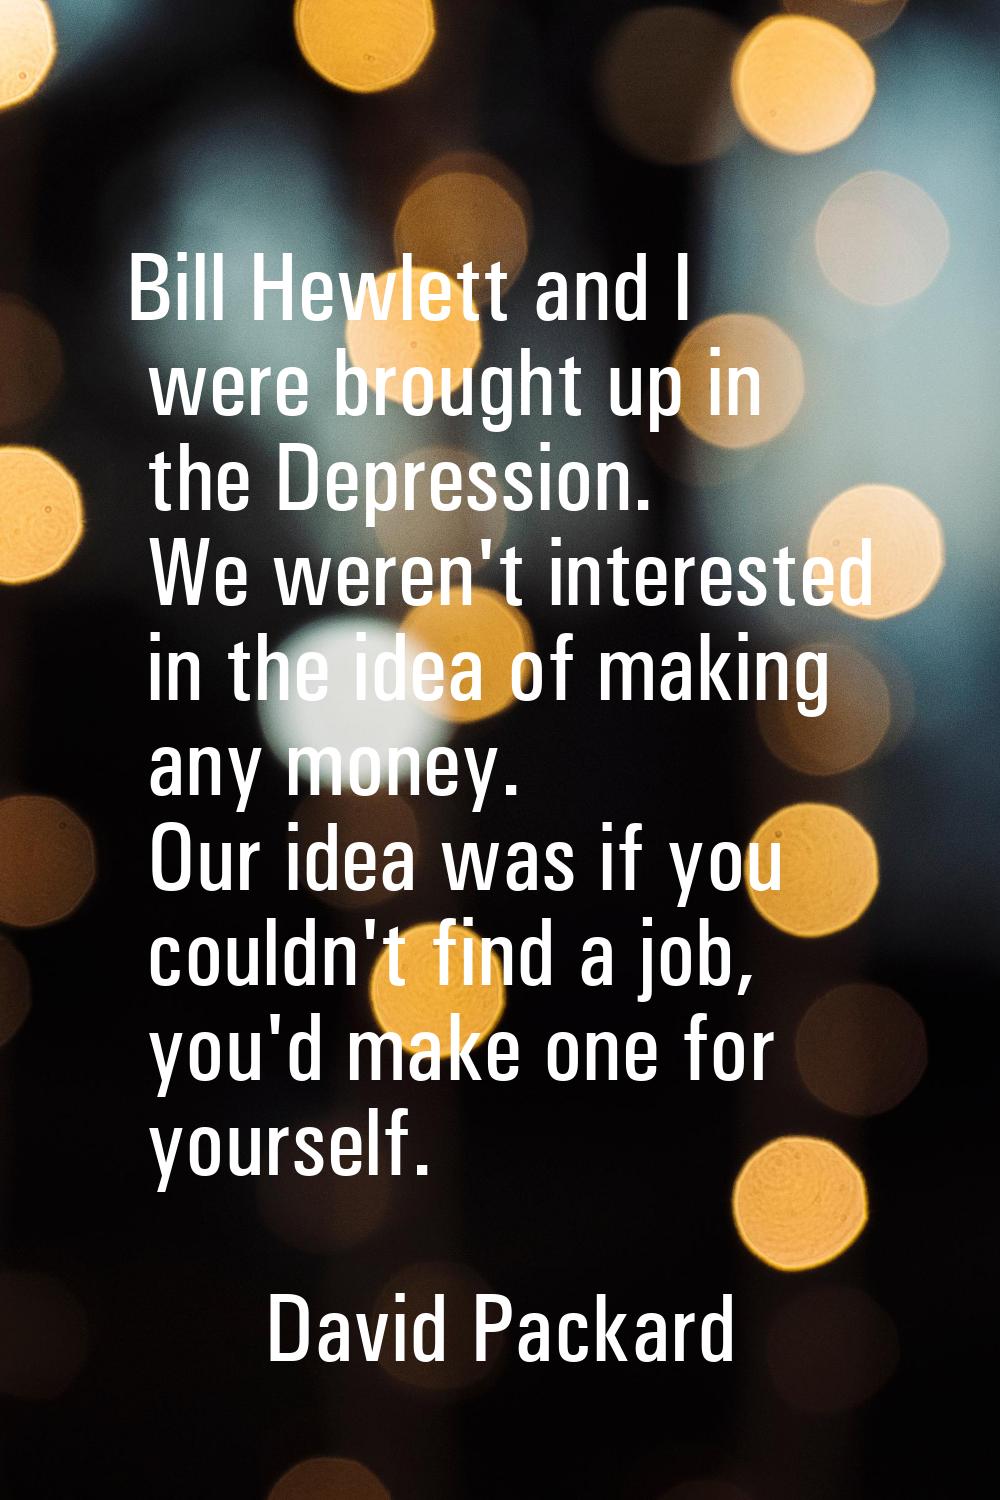 Bill Hewlett and I were brought up in the Depression. We weren't interested in the idea of making a